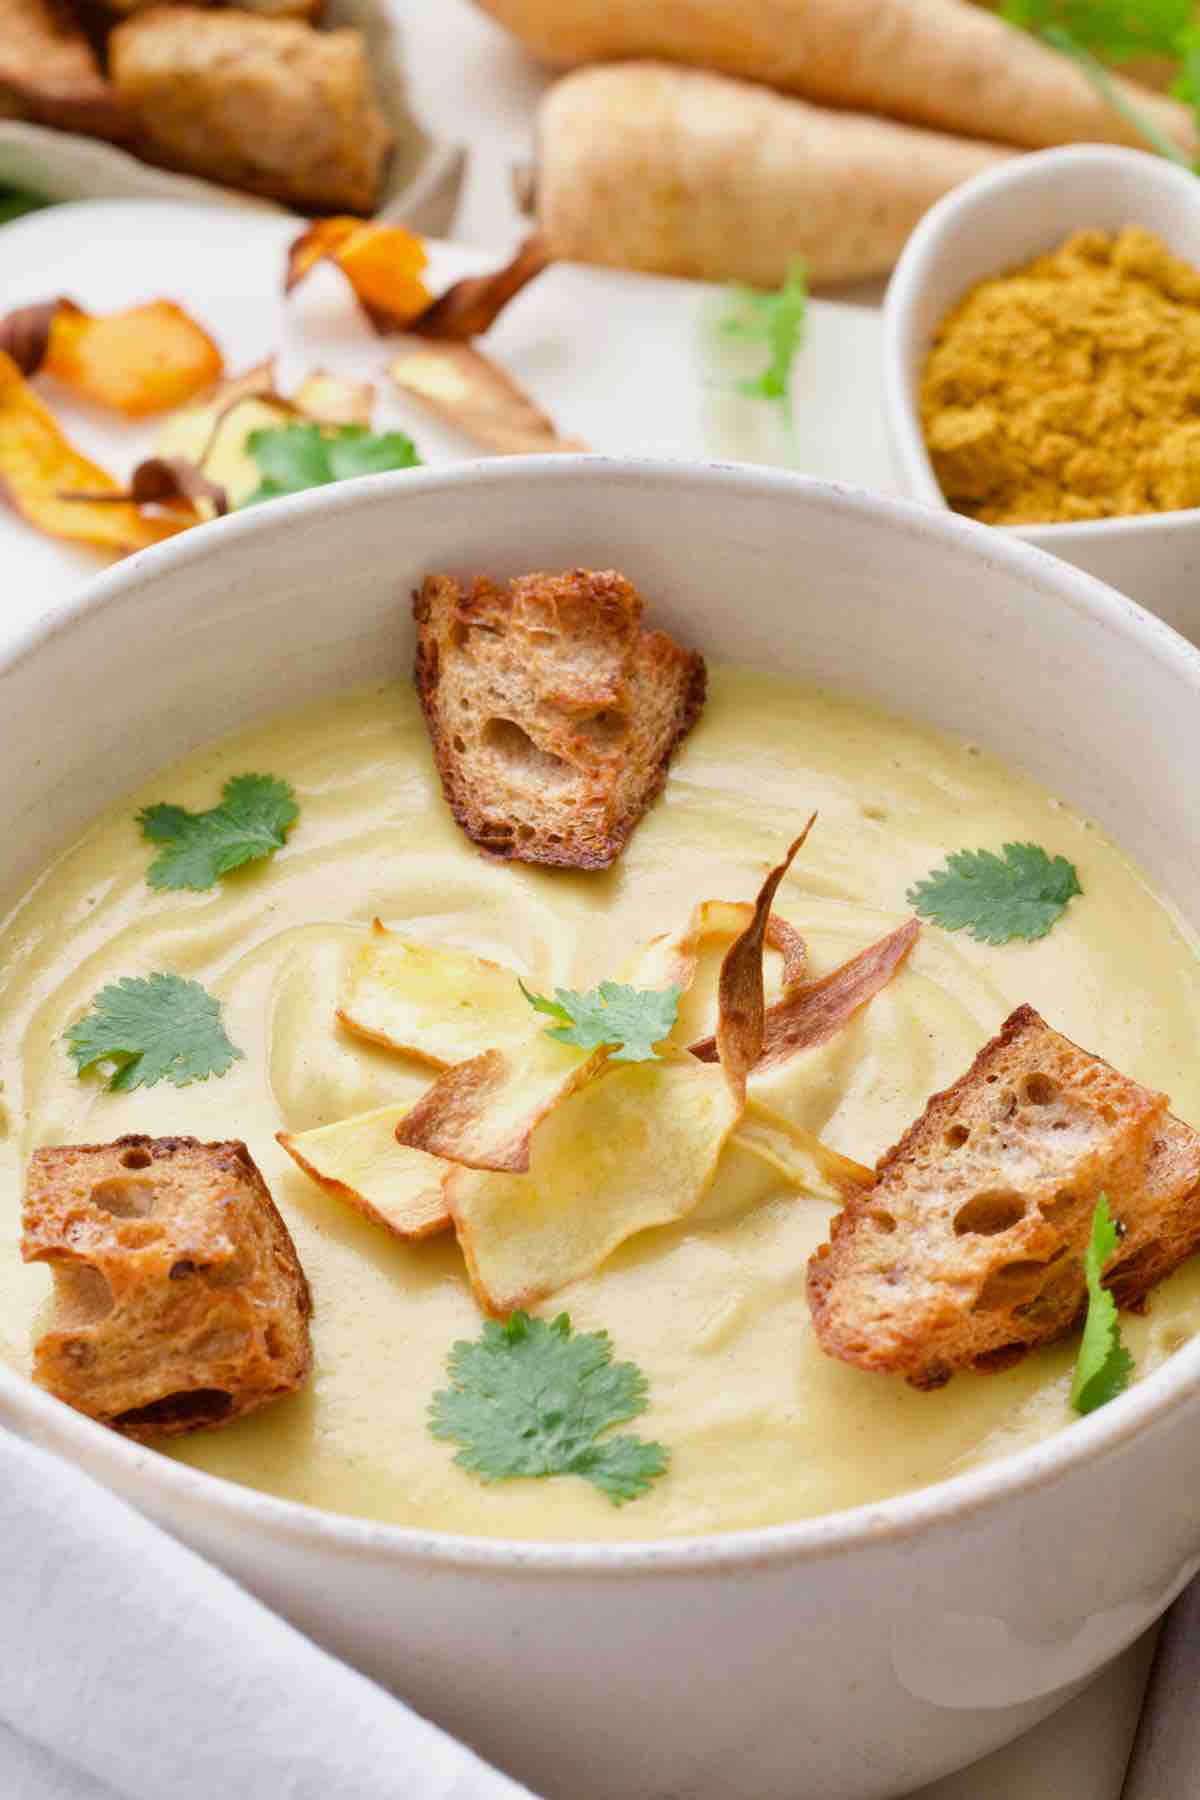 Bowl of curried parsnip soup with croutons, parsnip crisps and coriander.